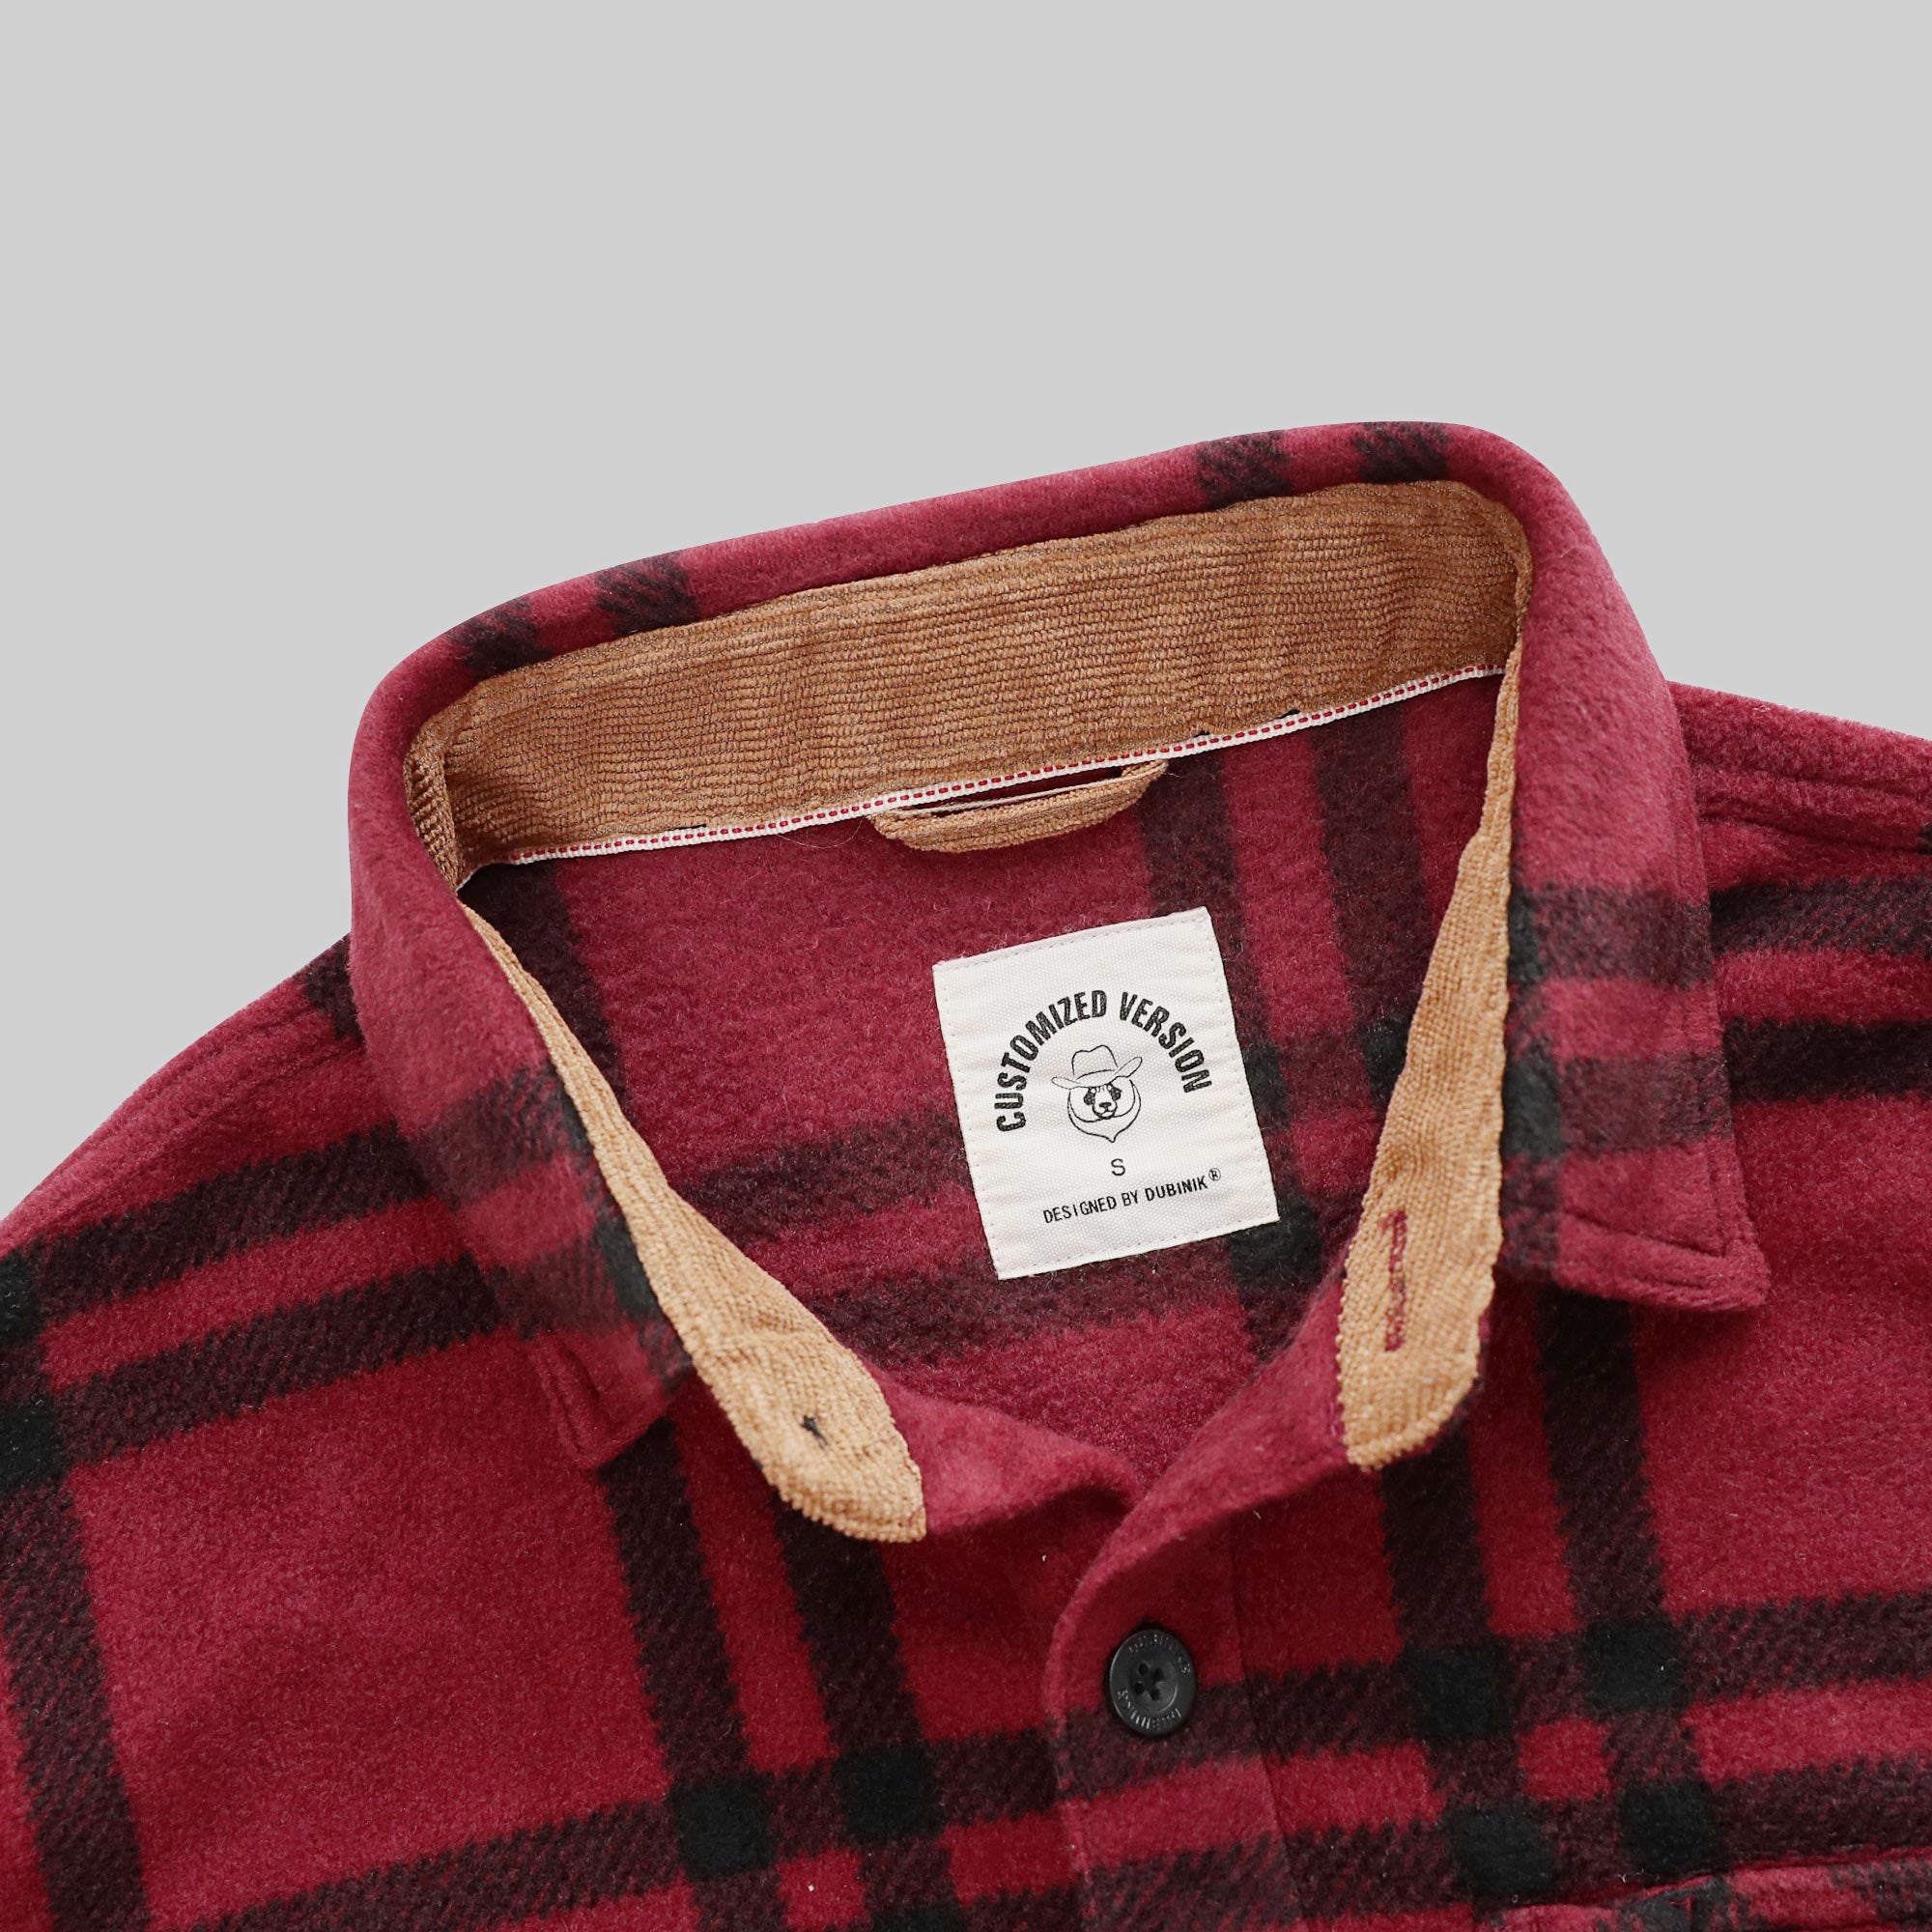 Mens Flannel Shirts Long Sleeve Flannel Shirt for Men Casual Button Down Brushed 100% Cotton Shirt #1818